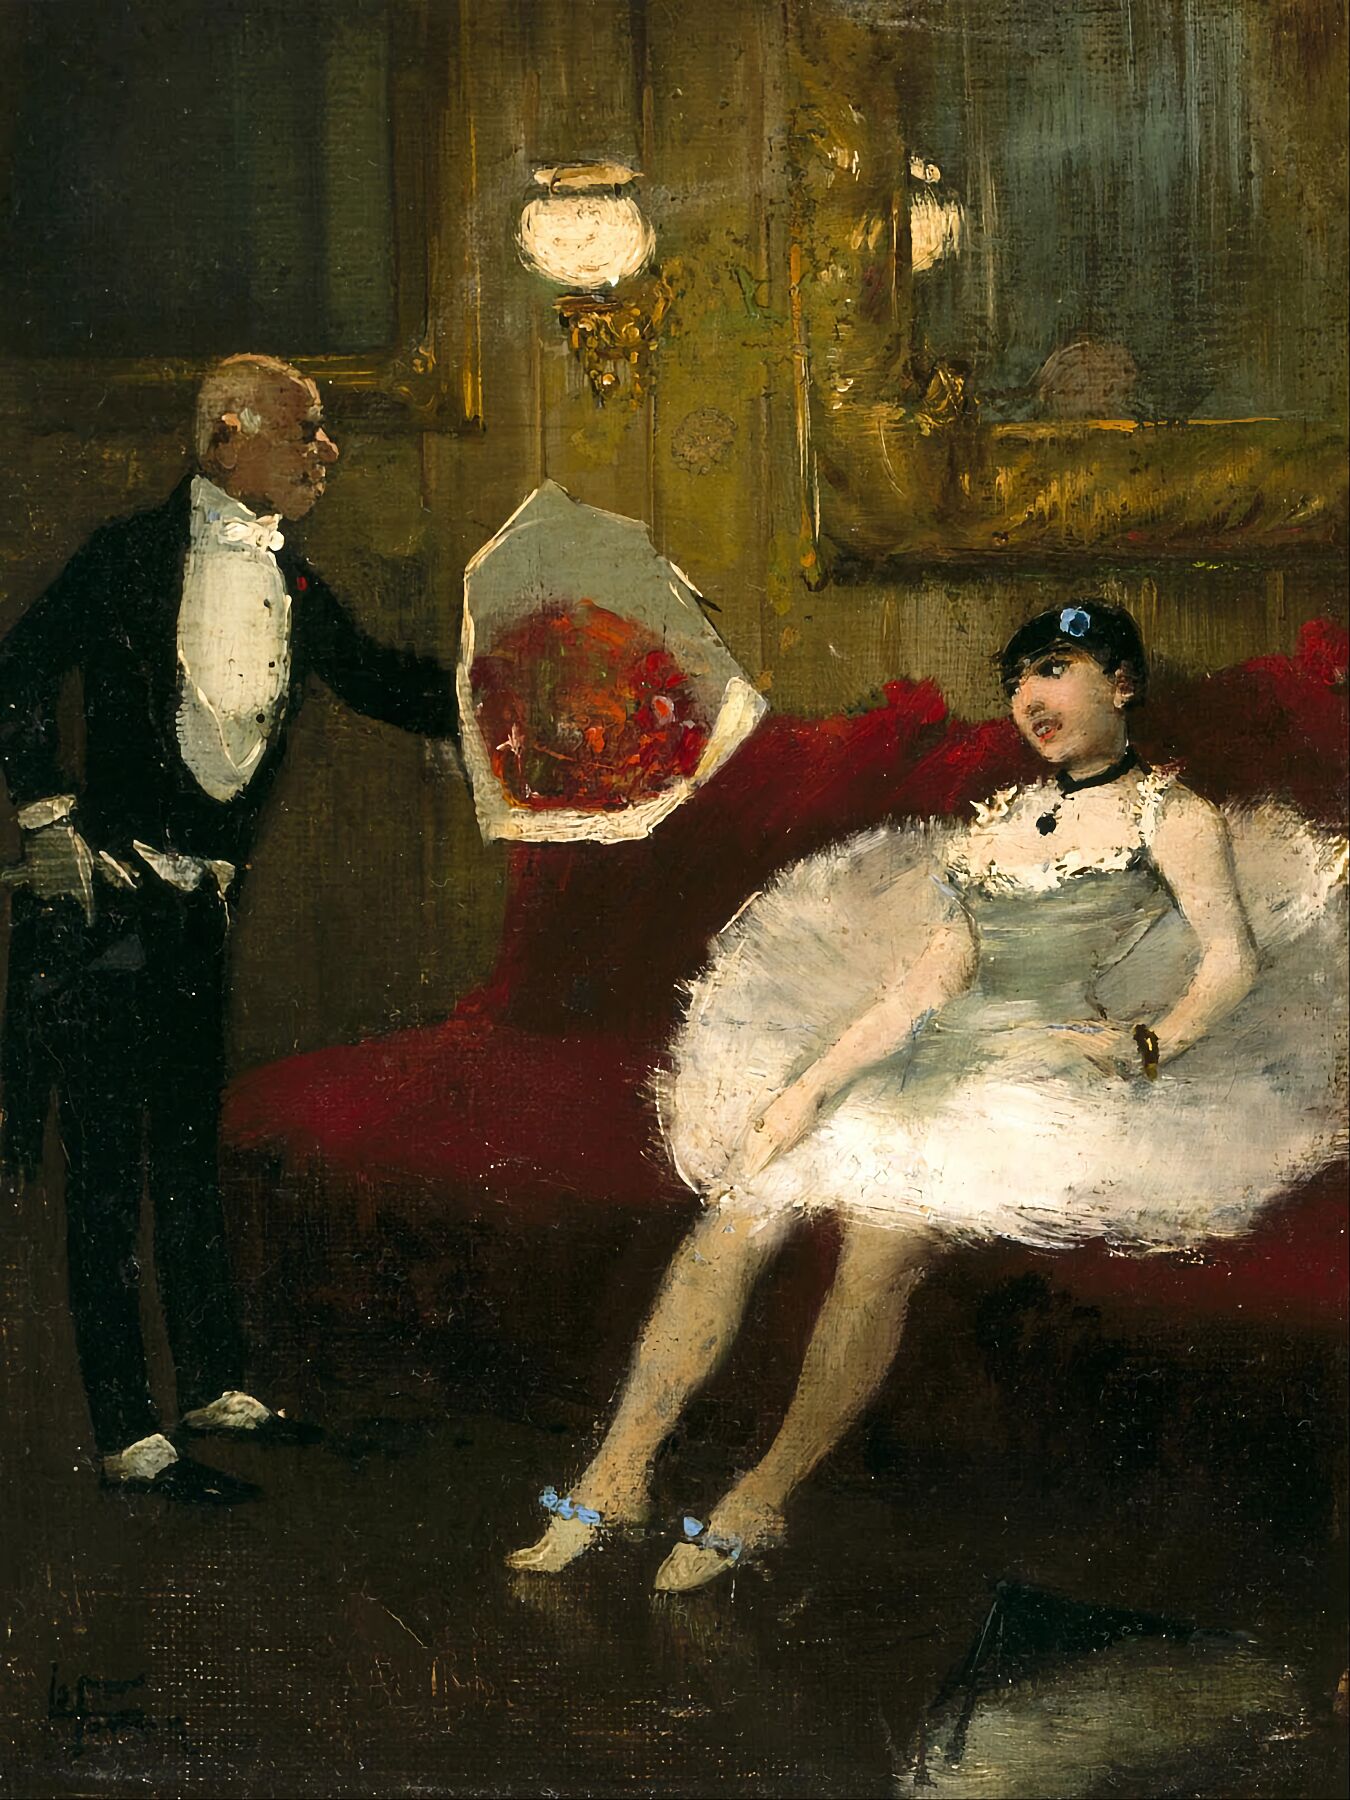 The Admirer by Jean-Louis Forain - c.1878